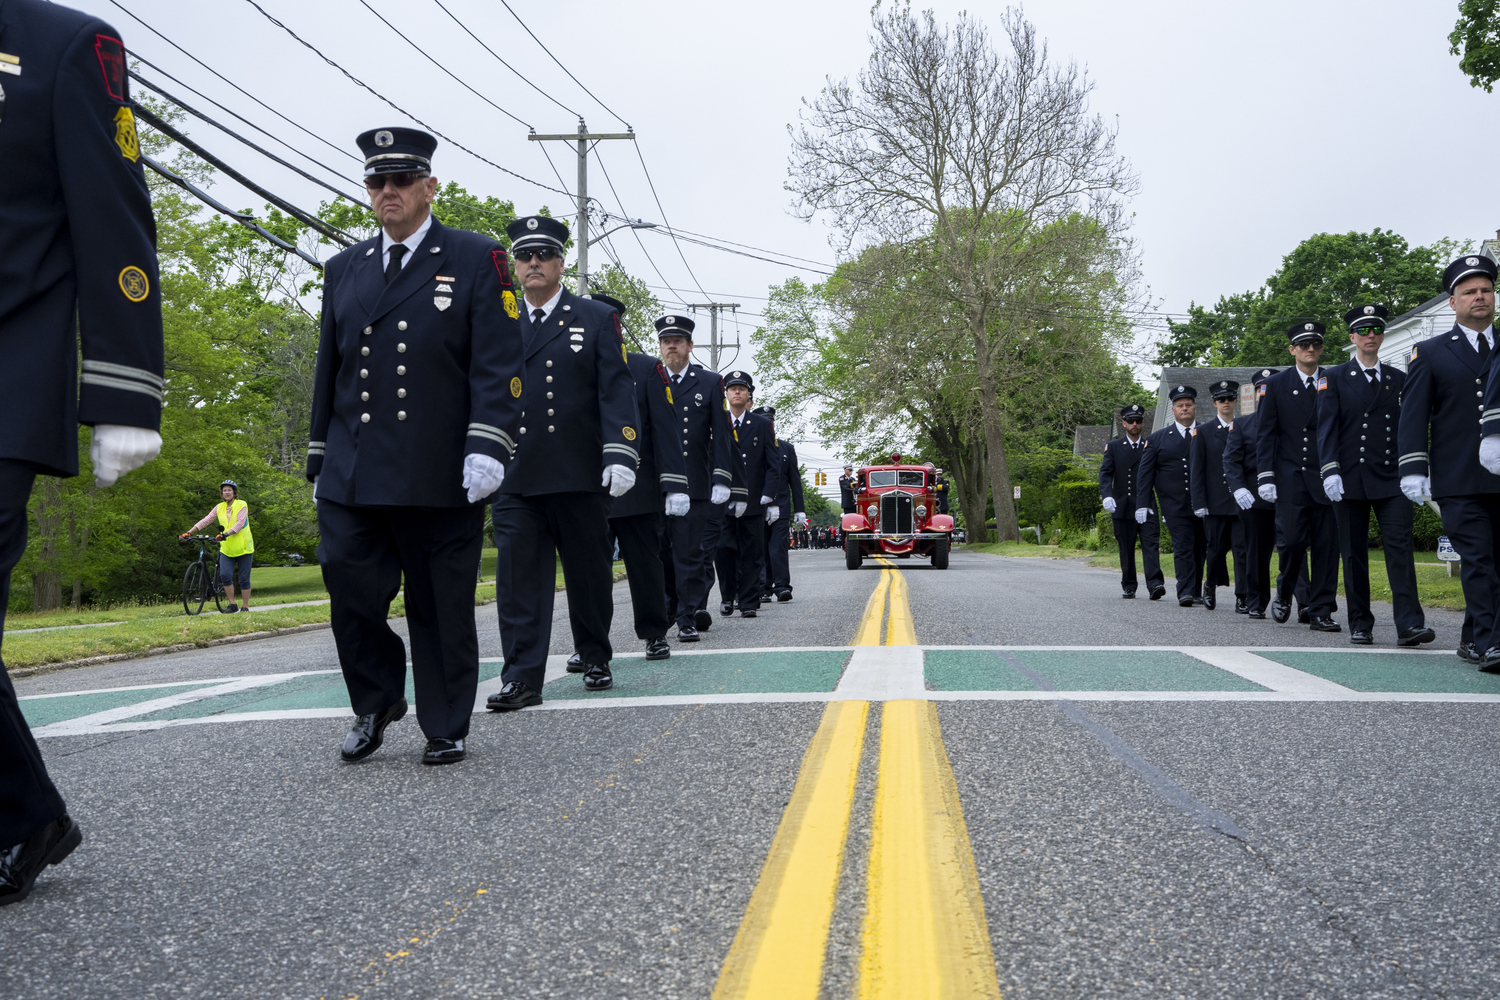 Members of the Sag Harbor Fire Department, followed by an antique truck, march in the village's annual Memorial Day Parade. LORI HAWKINS